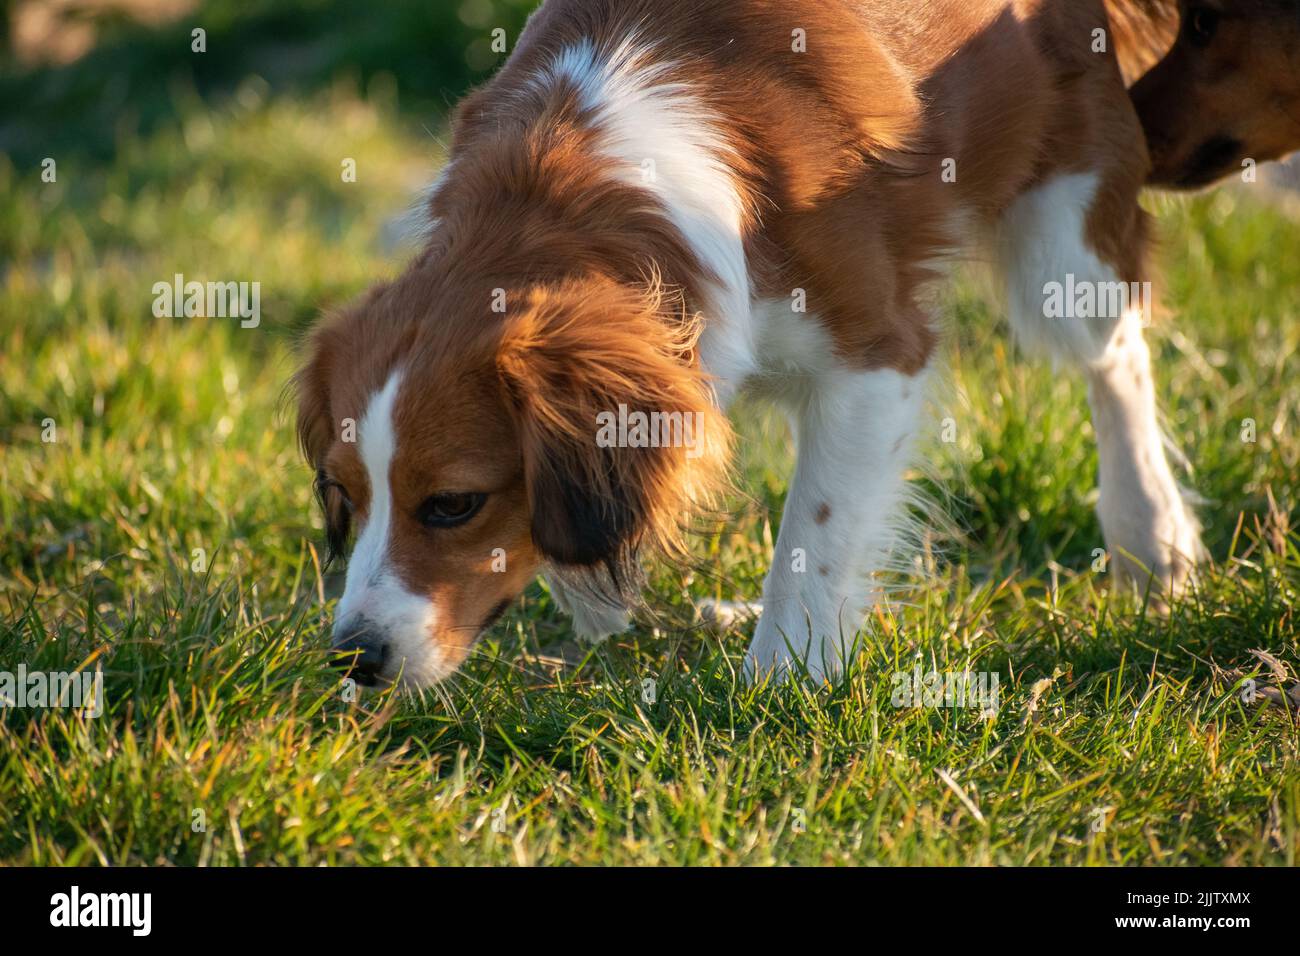 the Close-up shot of the Kooikerhondje breed dog in the park Stock Photo